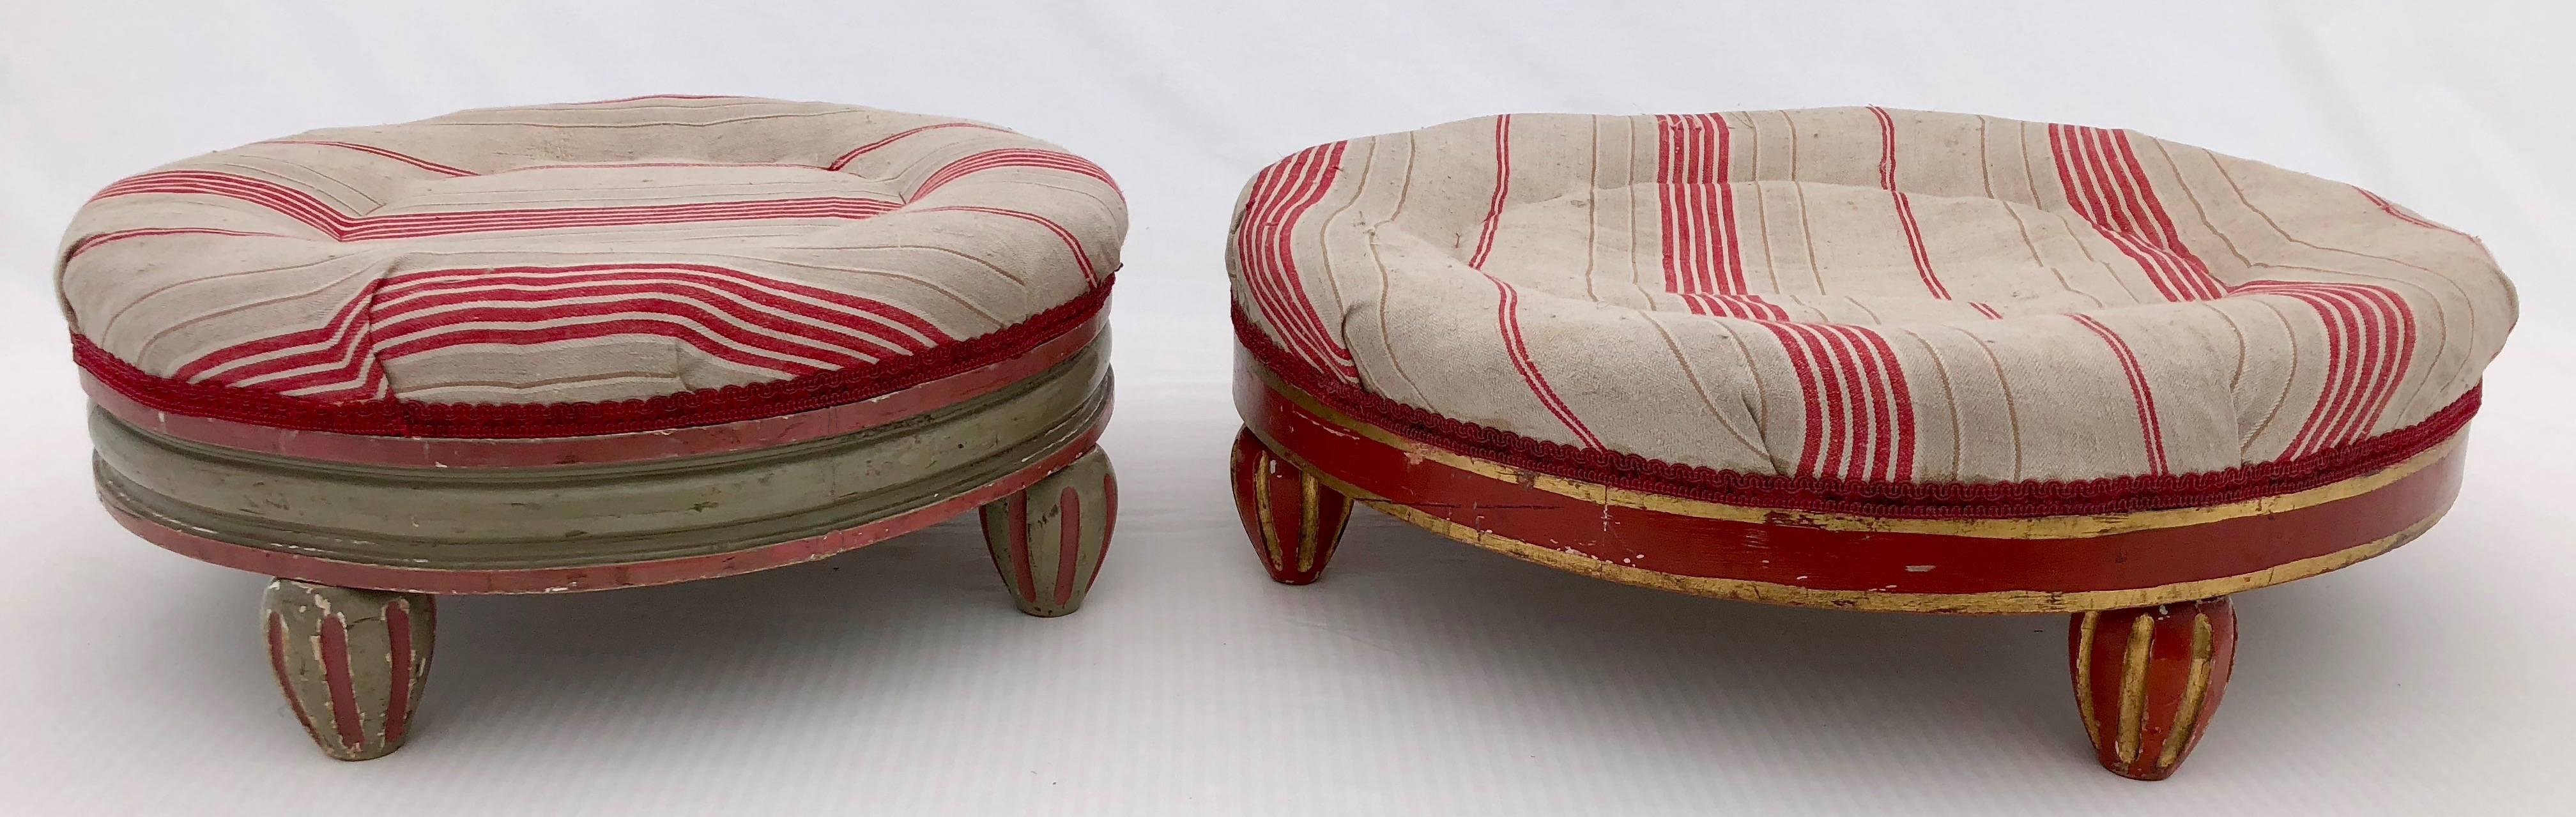 This is a set of two gorgeous French round footstools padded with hay and upholstered in an antique French red stripe linen. The larger footstool is hand-painted a lovely red with gold trim. The smaller footstool is hand-painted in a beautiful green